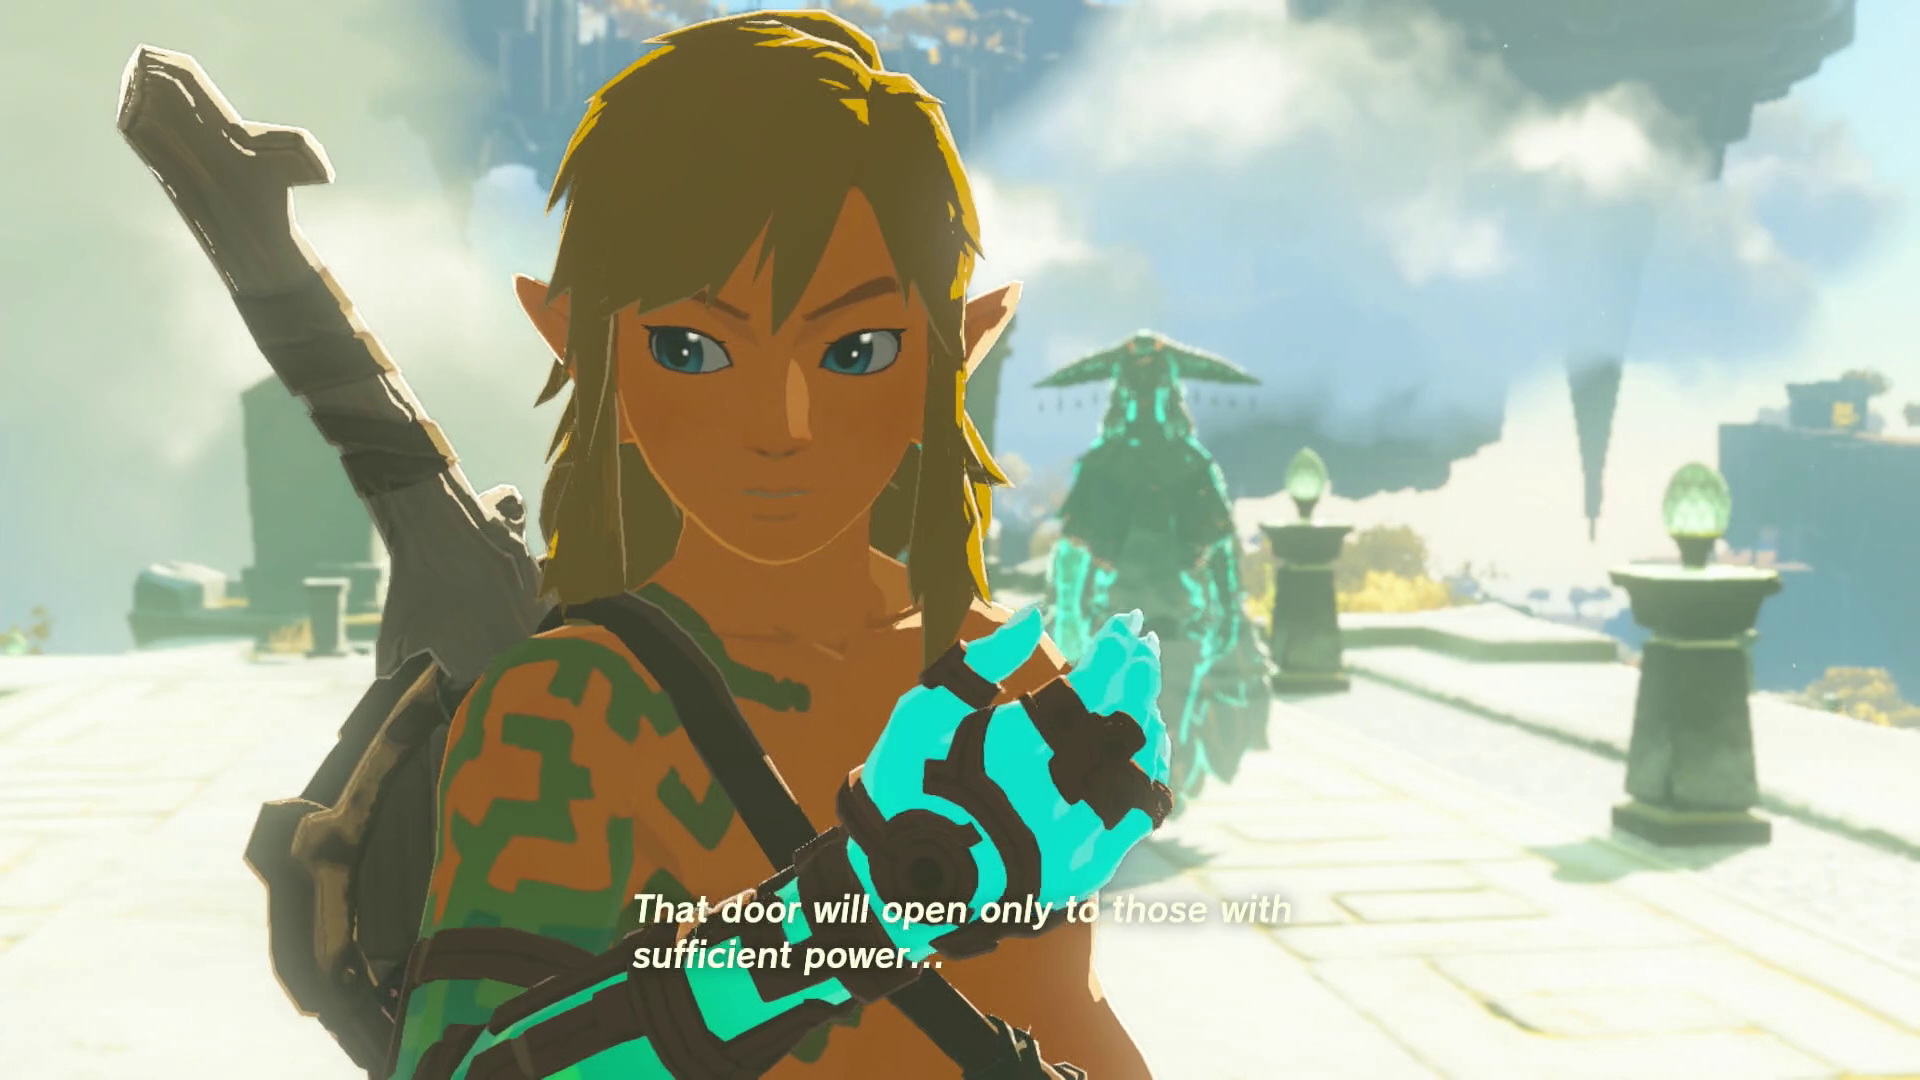 Zelda Reviews: People Sure Do Seem to Like that New Zelda Game